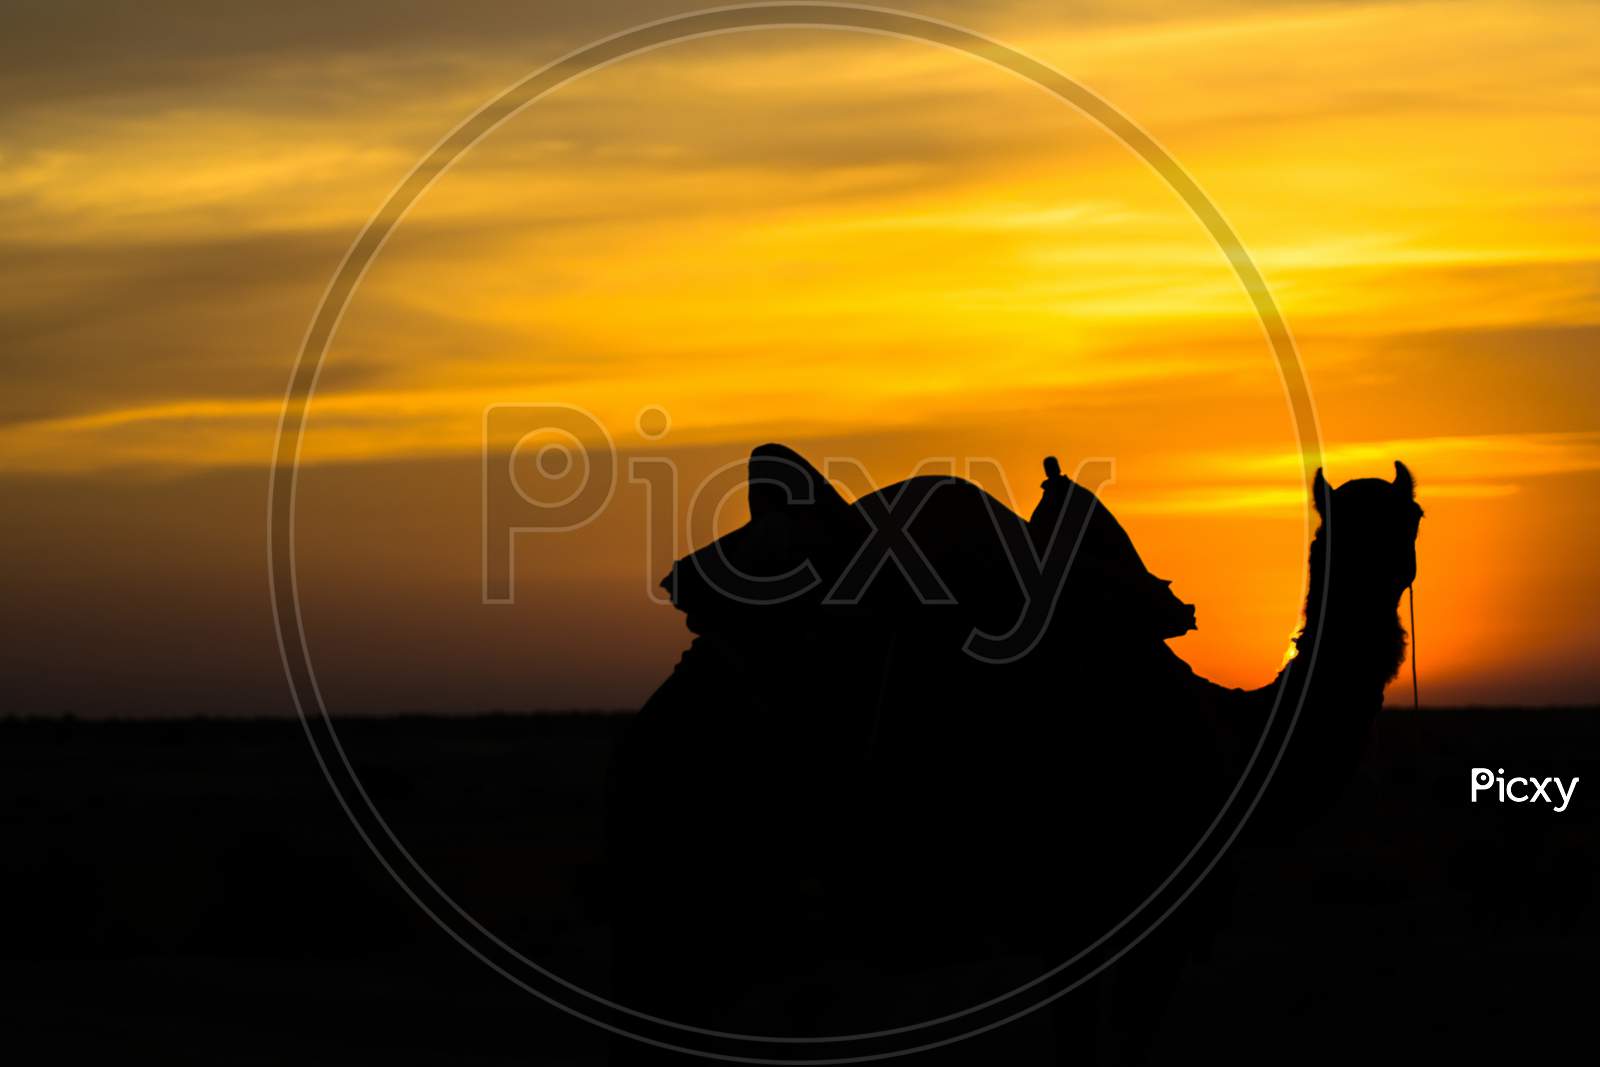 Sunset view with camel at Sam sand dunes of Jaisalmer the golden city, an ideal allure for travel enthusiasts